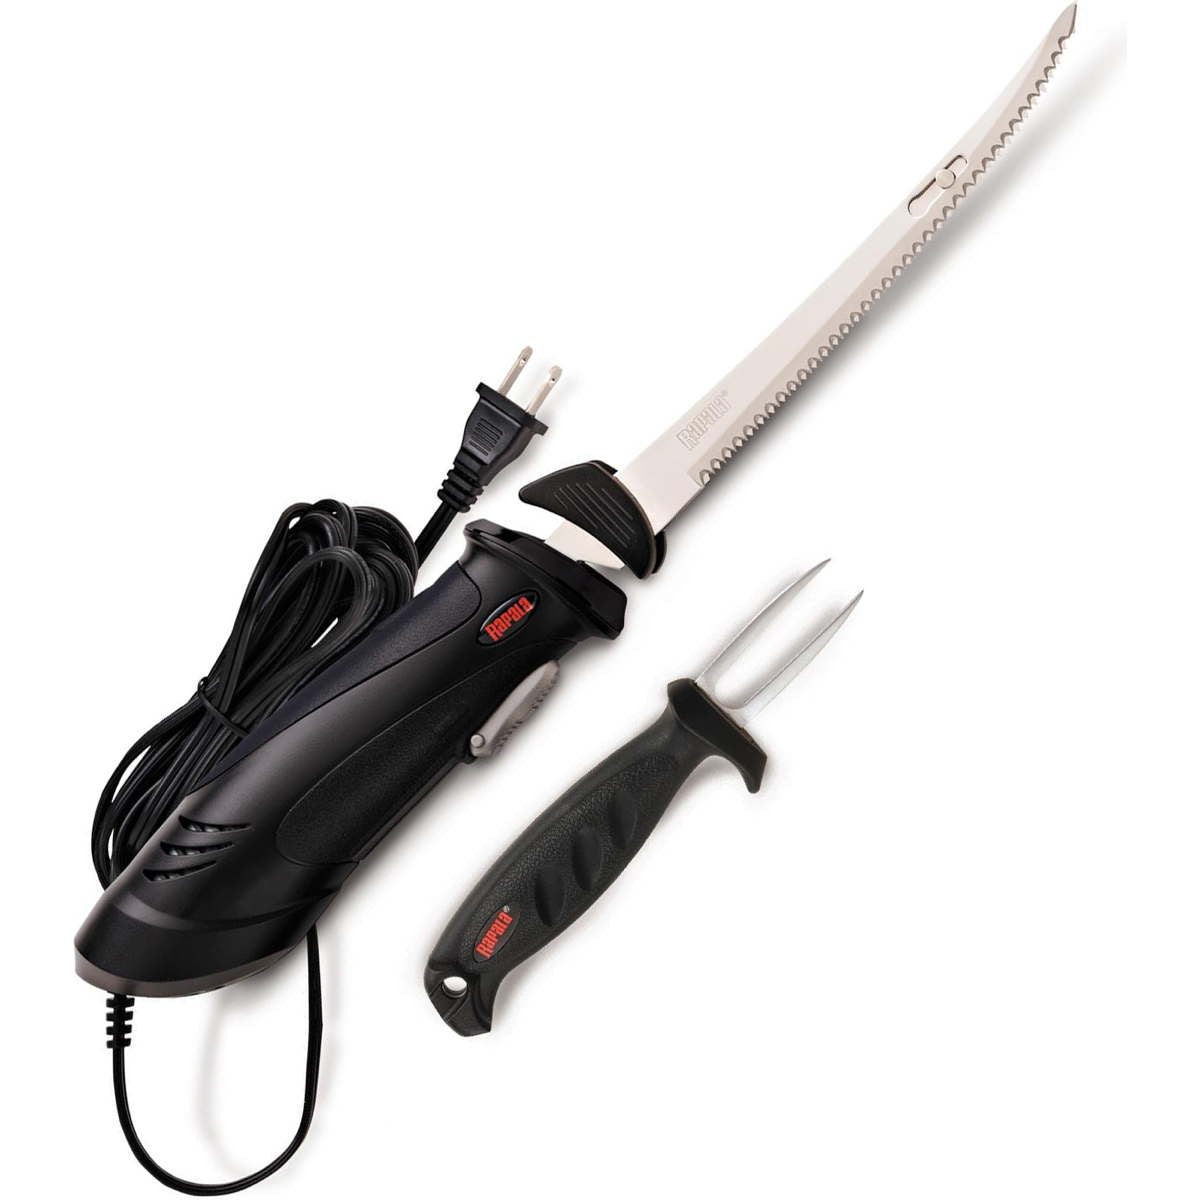 Photo of Rapala Electric Fillet and Fork for sale at United Tackle Shops.